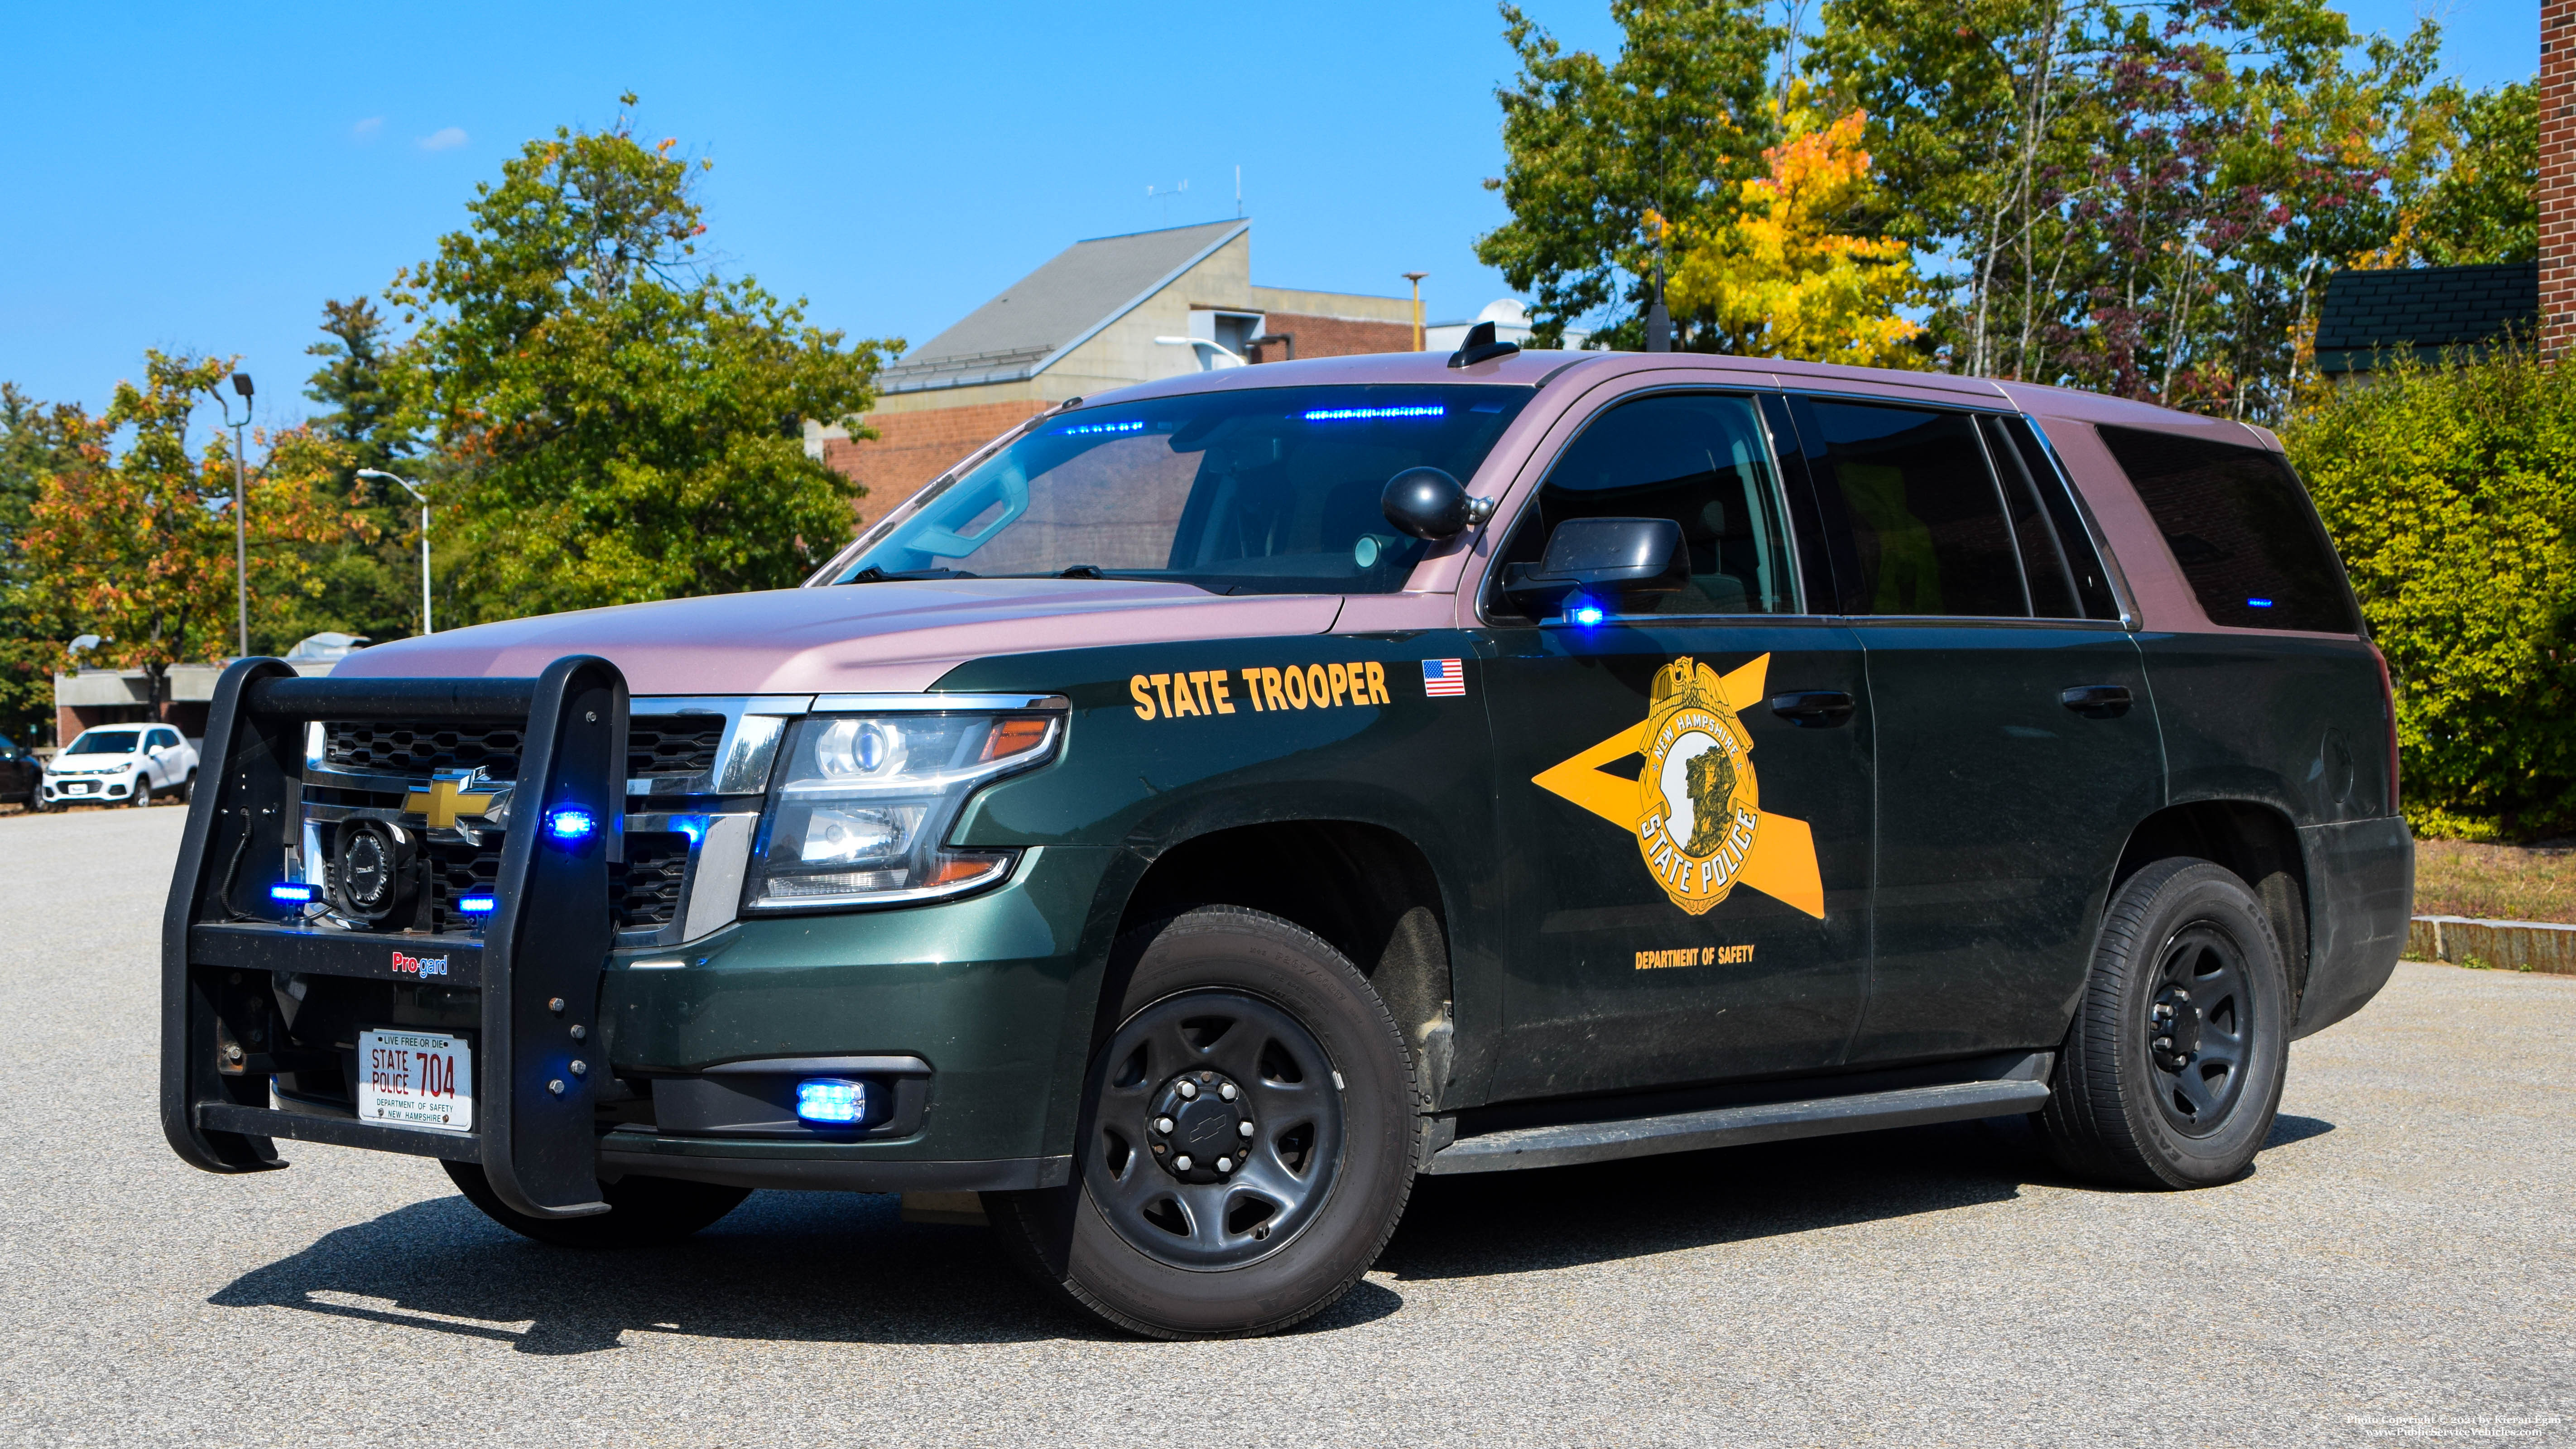 A photo  of New Hampshire State Police
            Cruiser 704, a 2017 Chevrolet Tahoe             taken by Kieran Egan